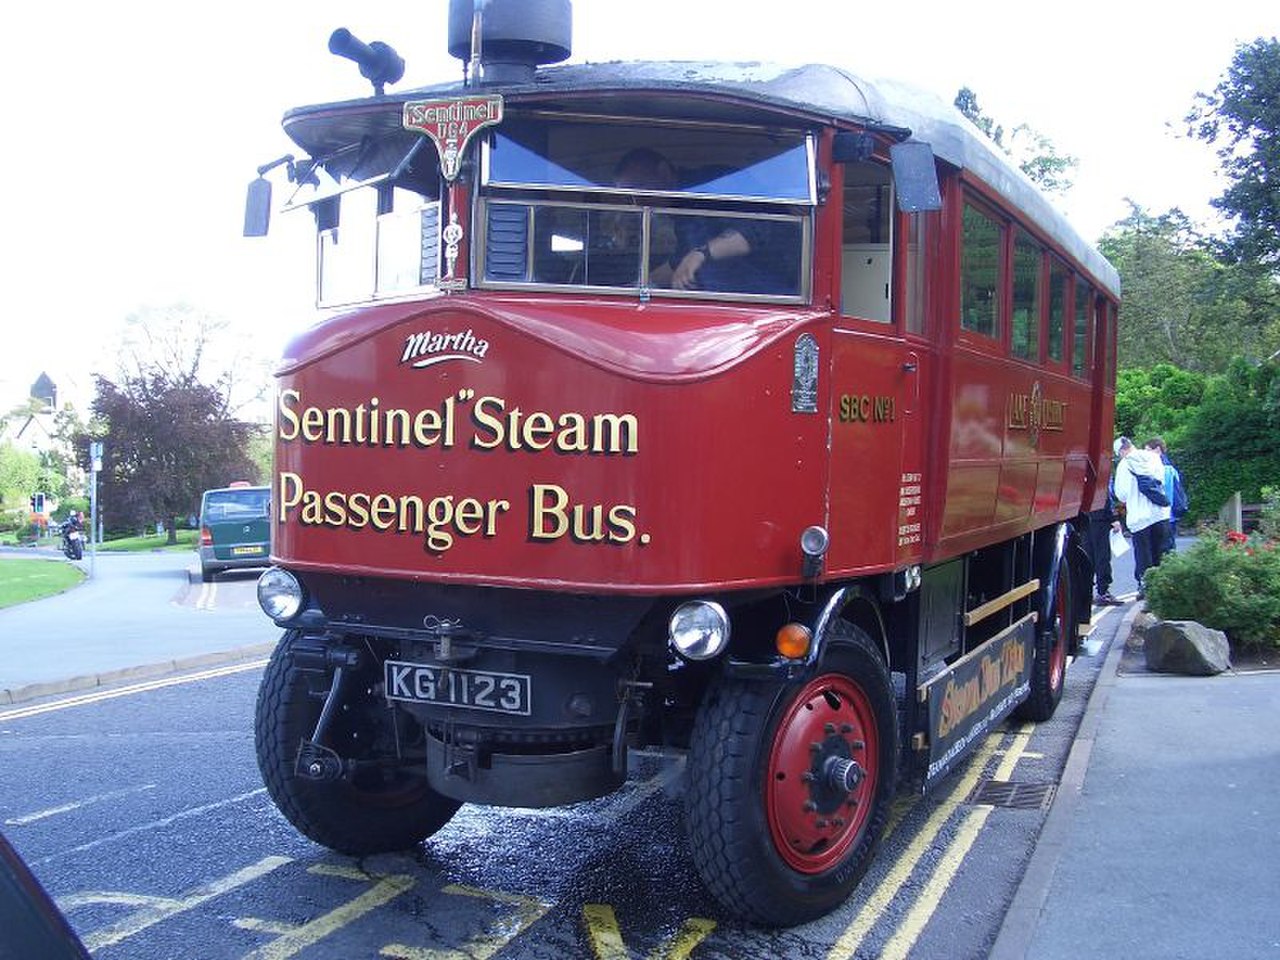 Vehicles which are powered by steam фото 79